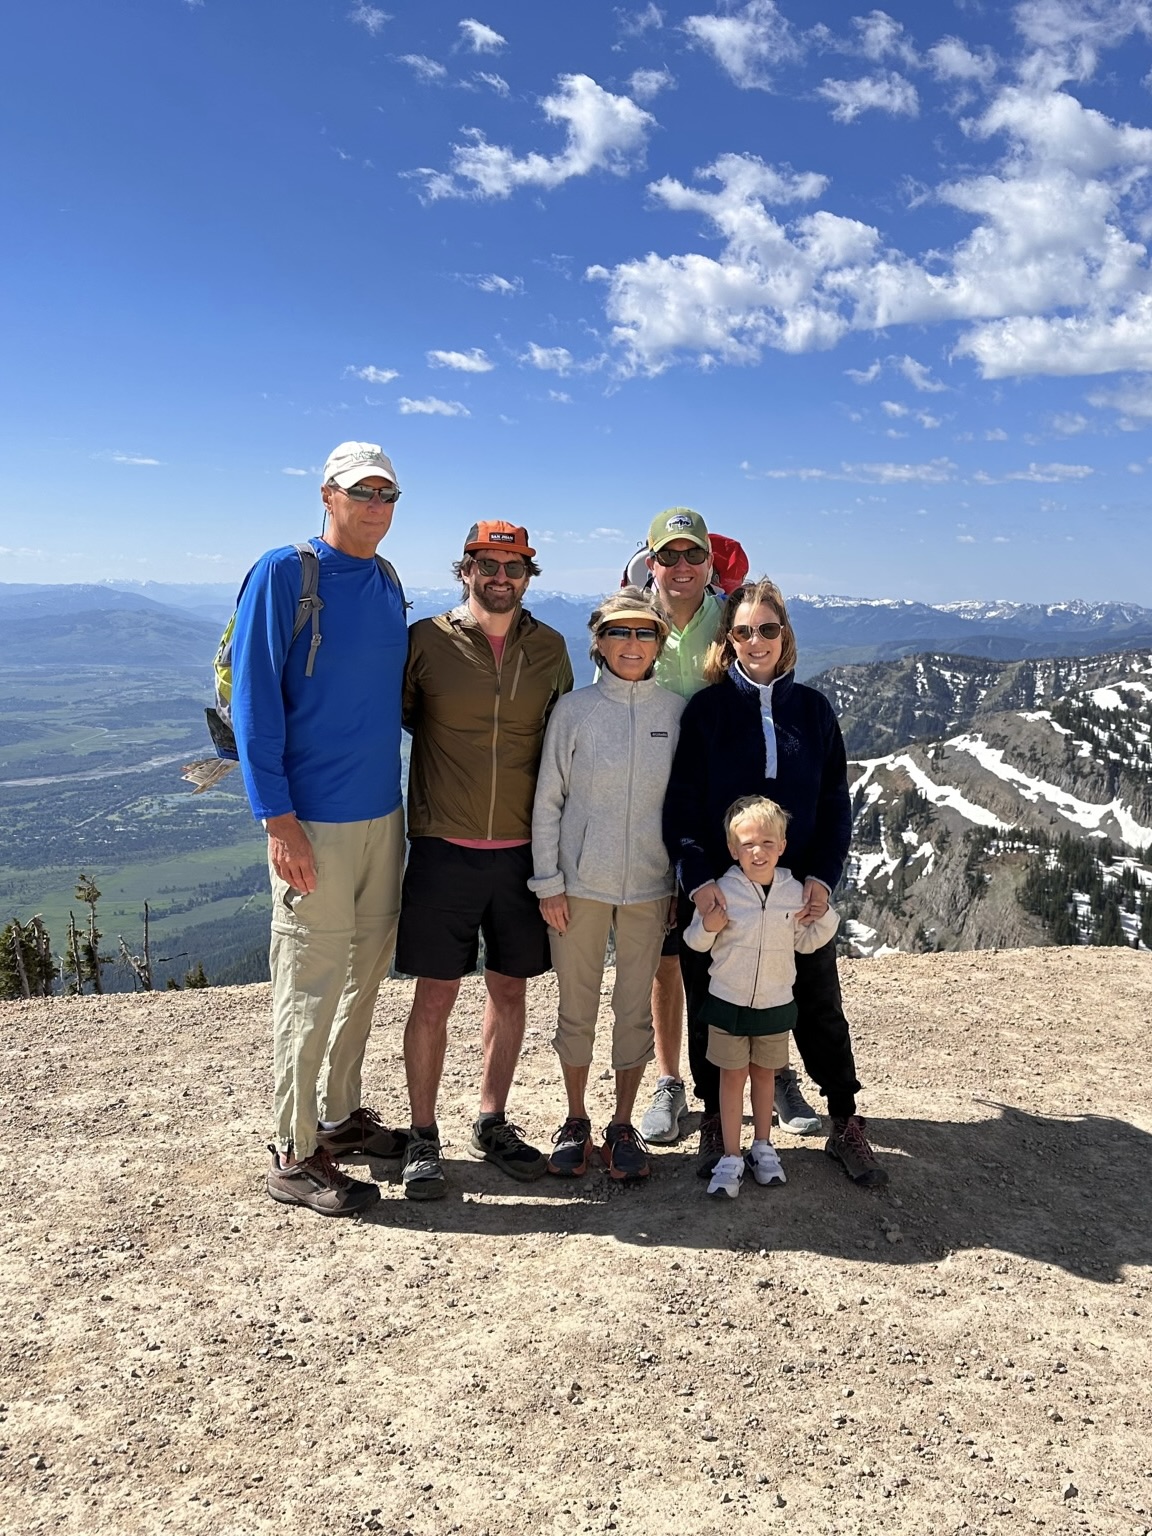 Six people, including a child, stand on a scenic mountain overlook with a vast landscape of valleys and snow-capped peaks in the background. They are dressed in outdoor clothing, smiling, and standing close together under a clear blue sky.